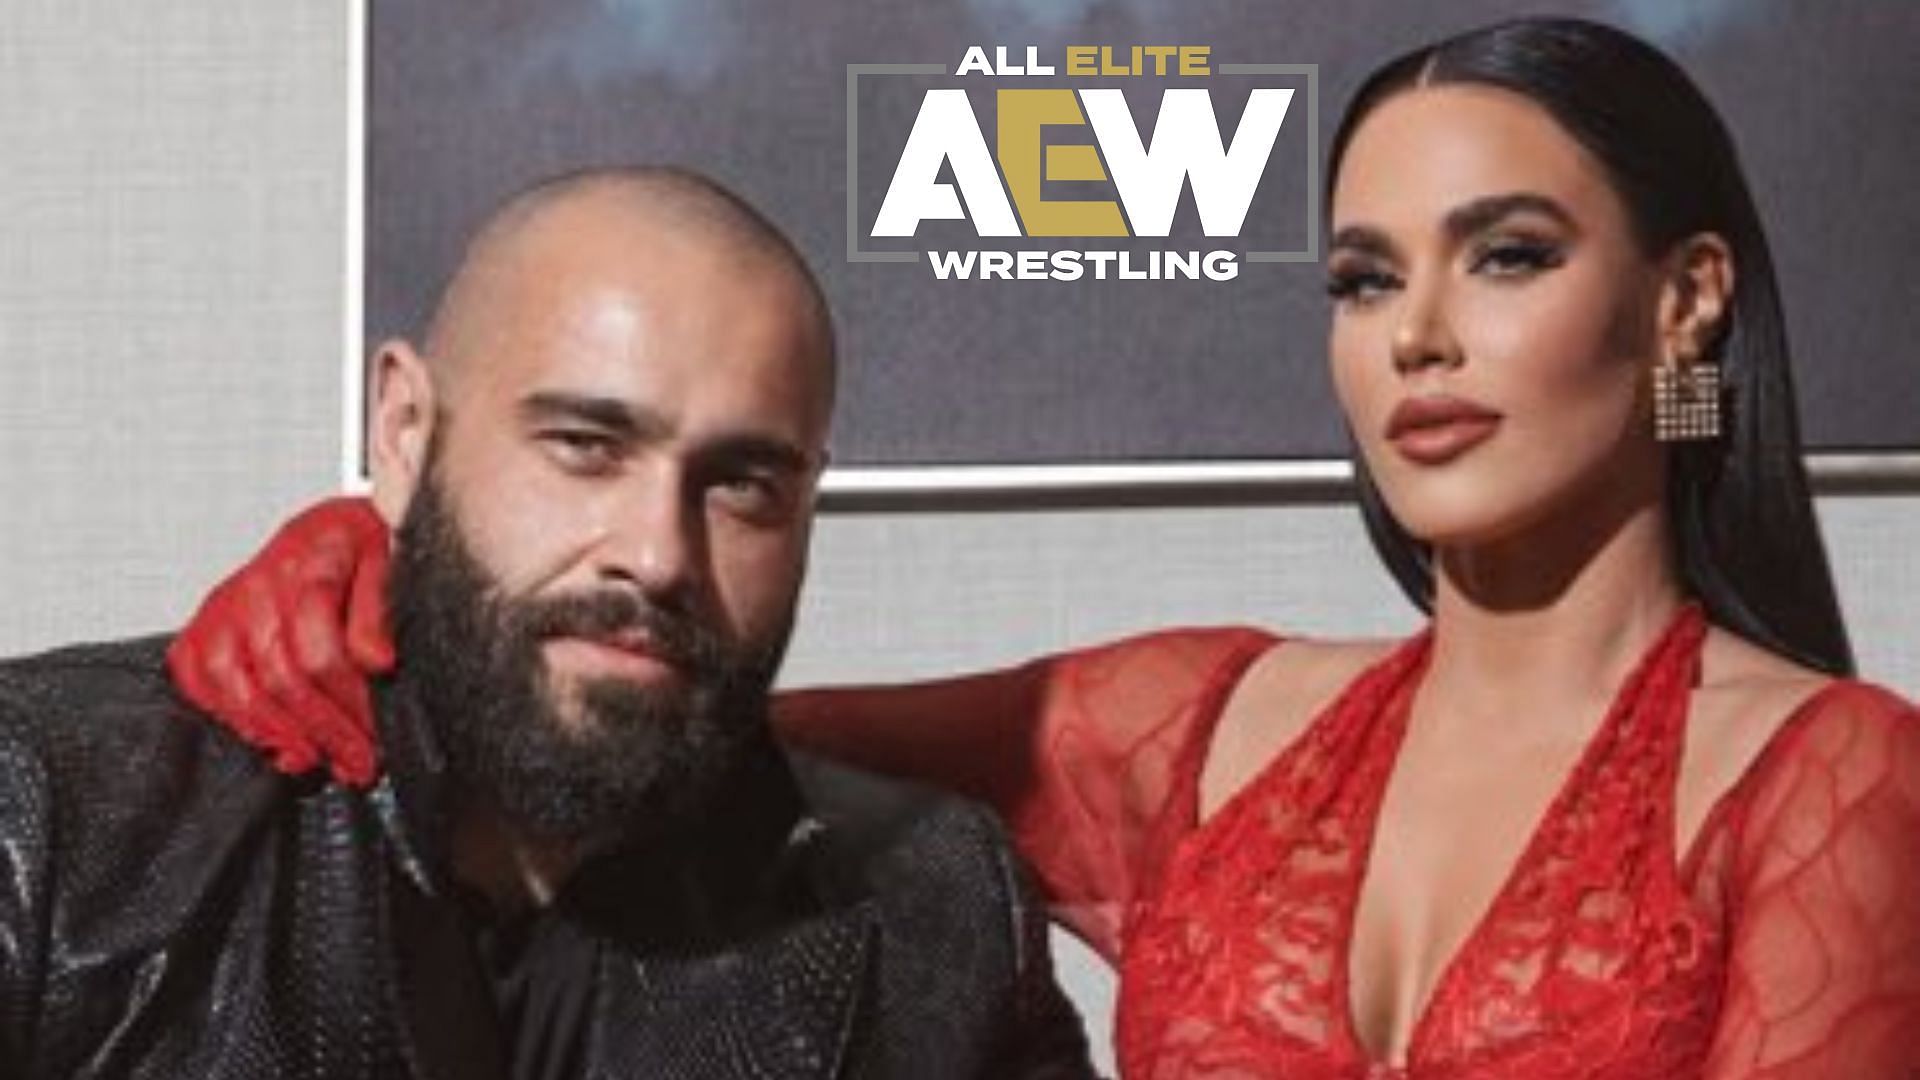 Lana (CJ Perry) really wants to beat up a young AEW star for seducing Miro